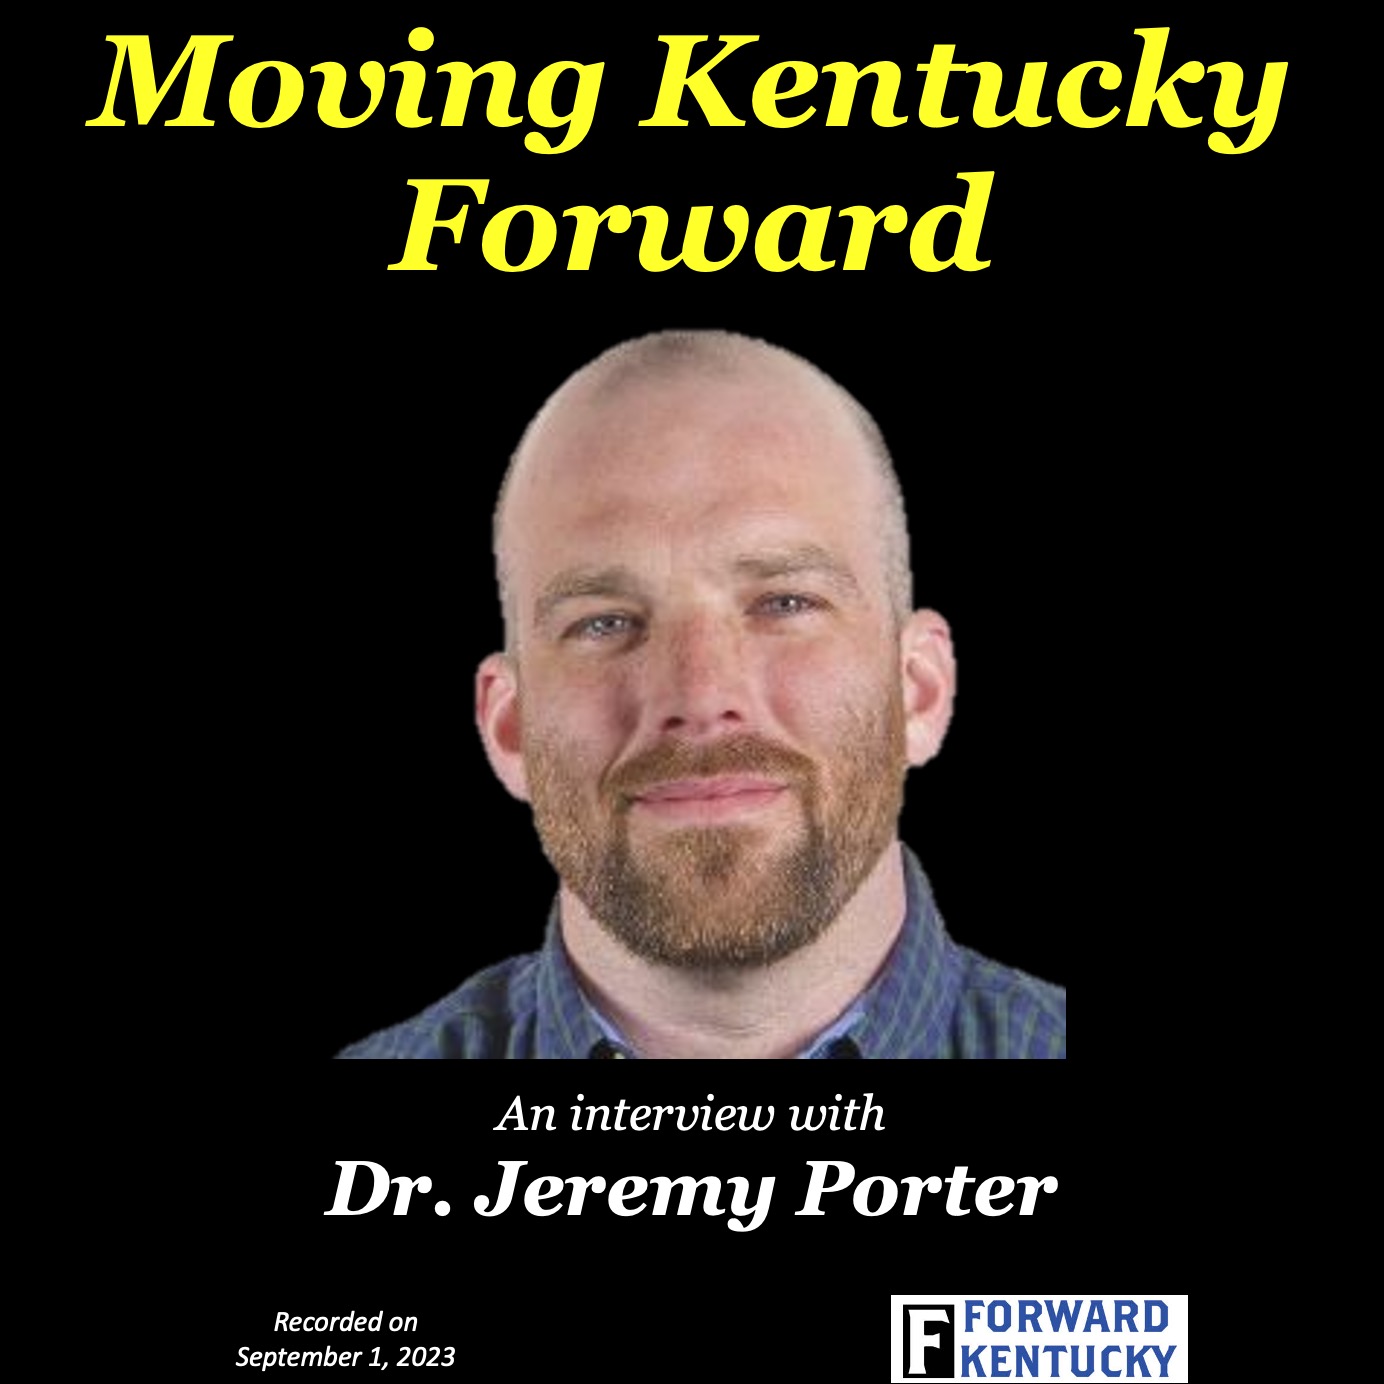 An interview with Dr. Jeremy Porter